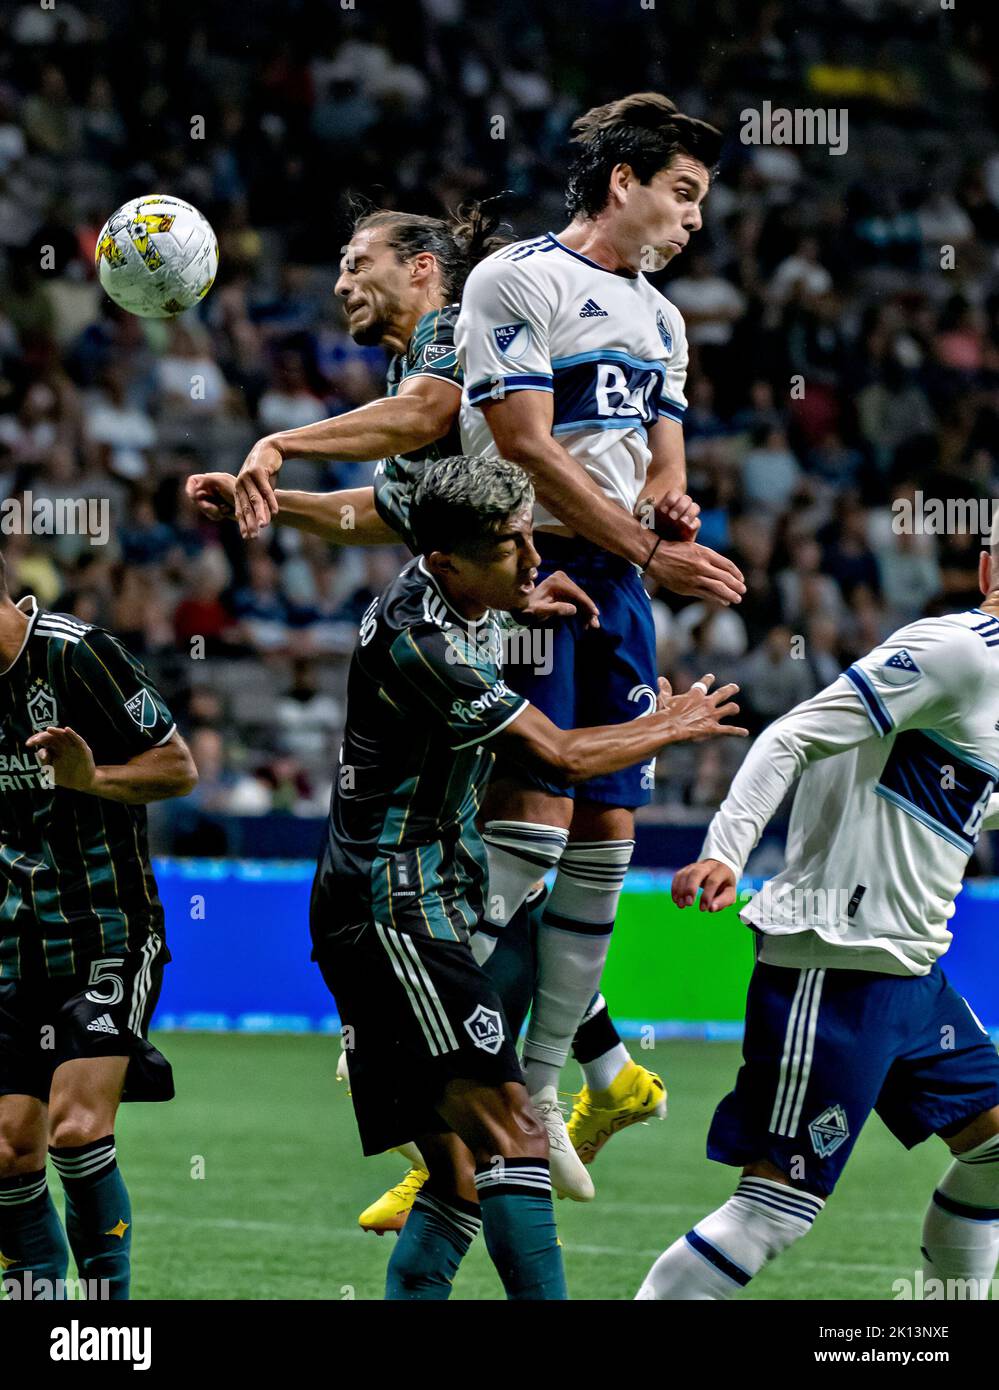 Vancouver, Canada. 14th Sep, 2022. Martin Caceres of LA Galaxy (top, L) and Brian White of Vancouver Whitecaps FC compete for the ball during the 2022 Major League Soccer (MLS) match between Vancouver Whitecaps FC and LA Galaxy at BC Place stadium in Vancouver, Canada, Sept. 14, 2022. Credit: Andrew Soong/Xinhua/Alamy Live News Stock Photo